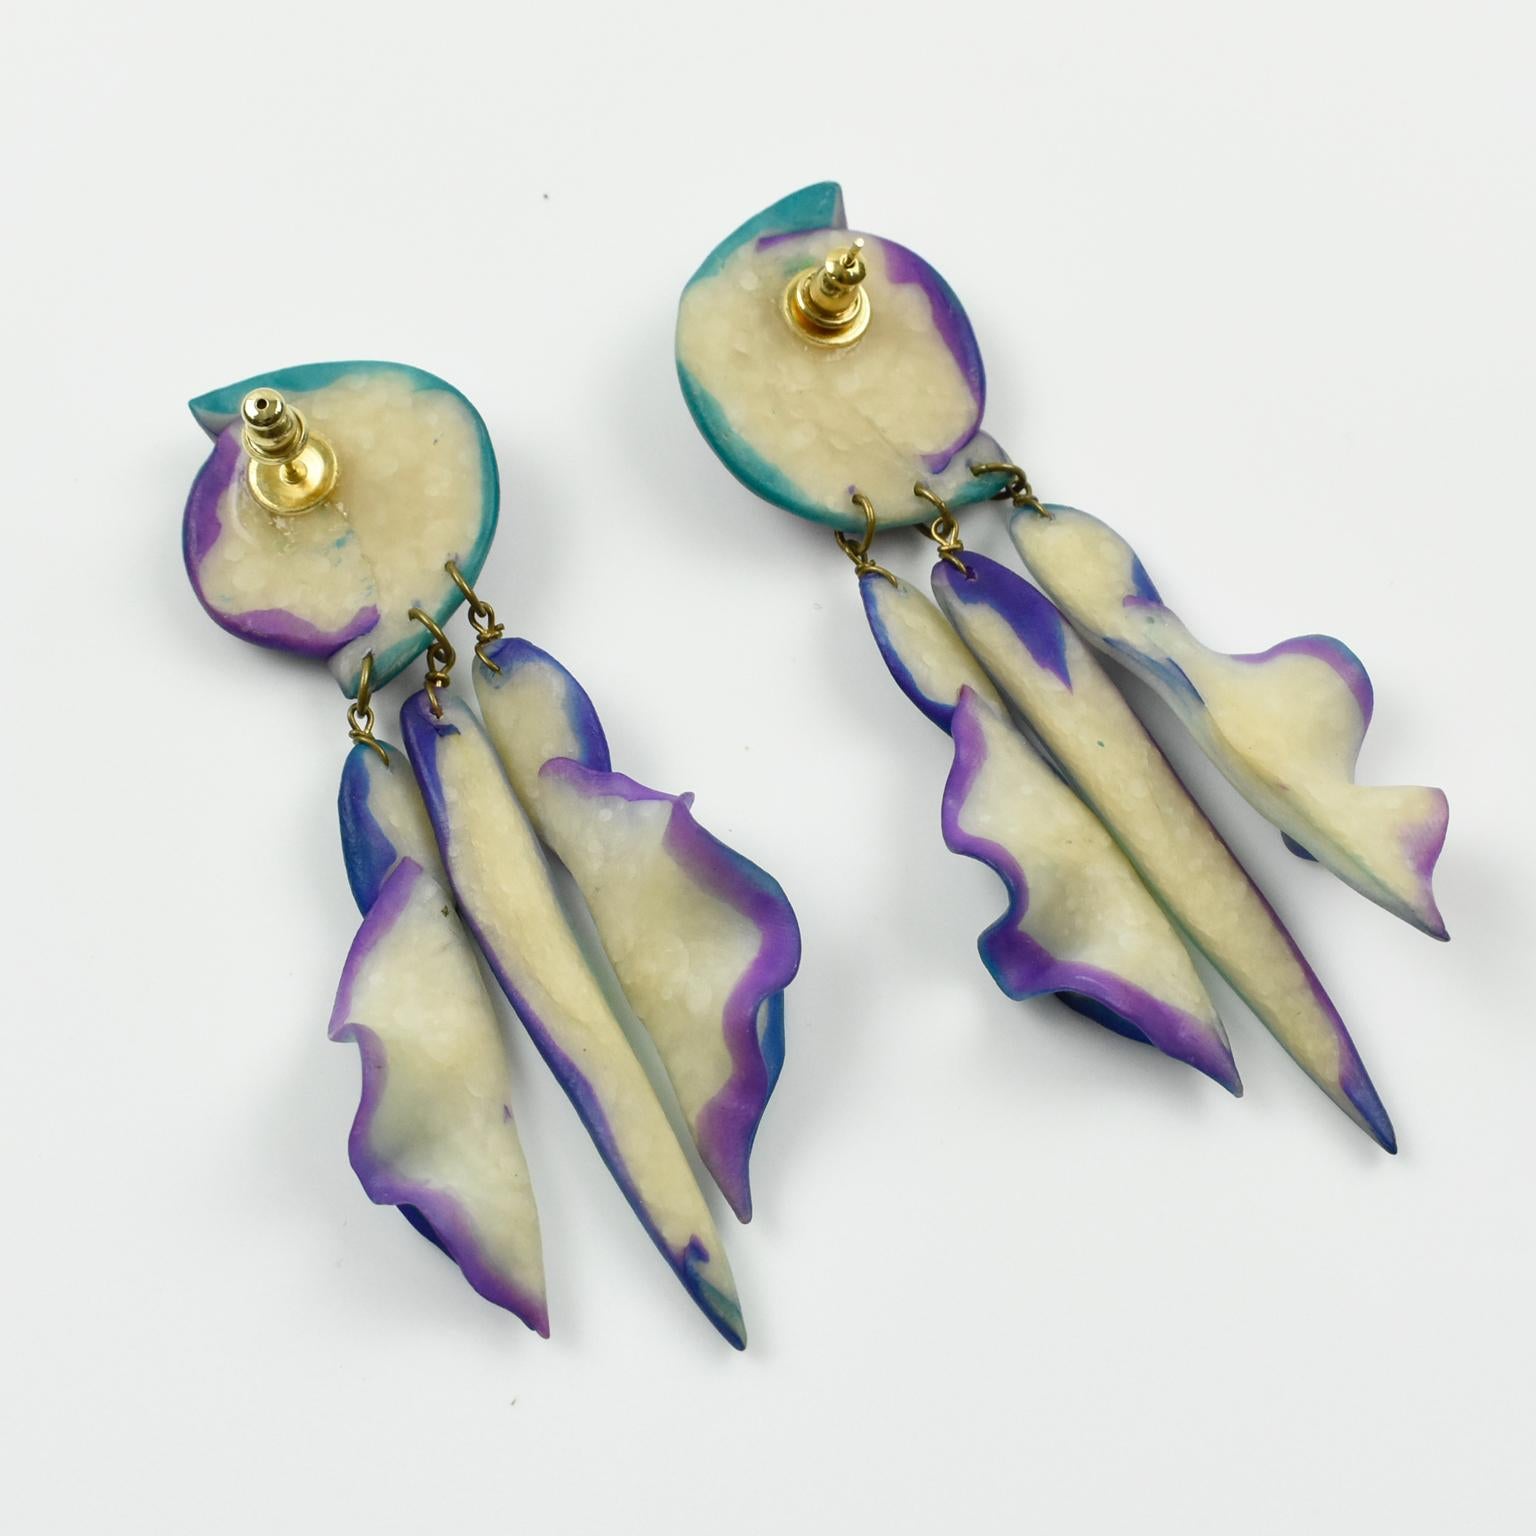 Modernist Futuristic Turquoise and Purple Resin Pierced Earrings For Sale